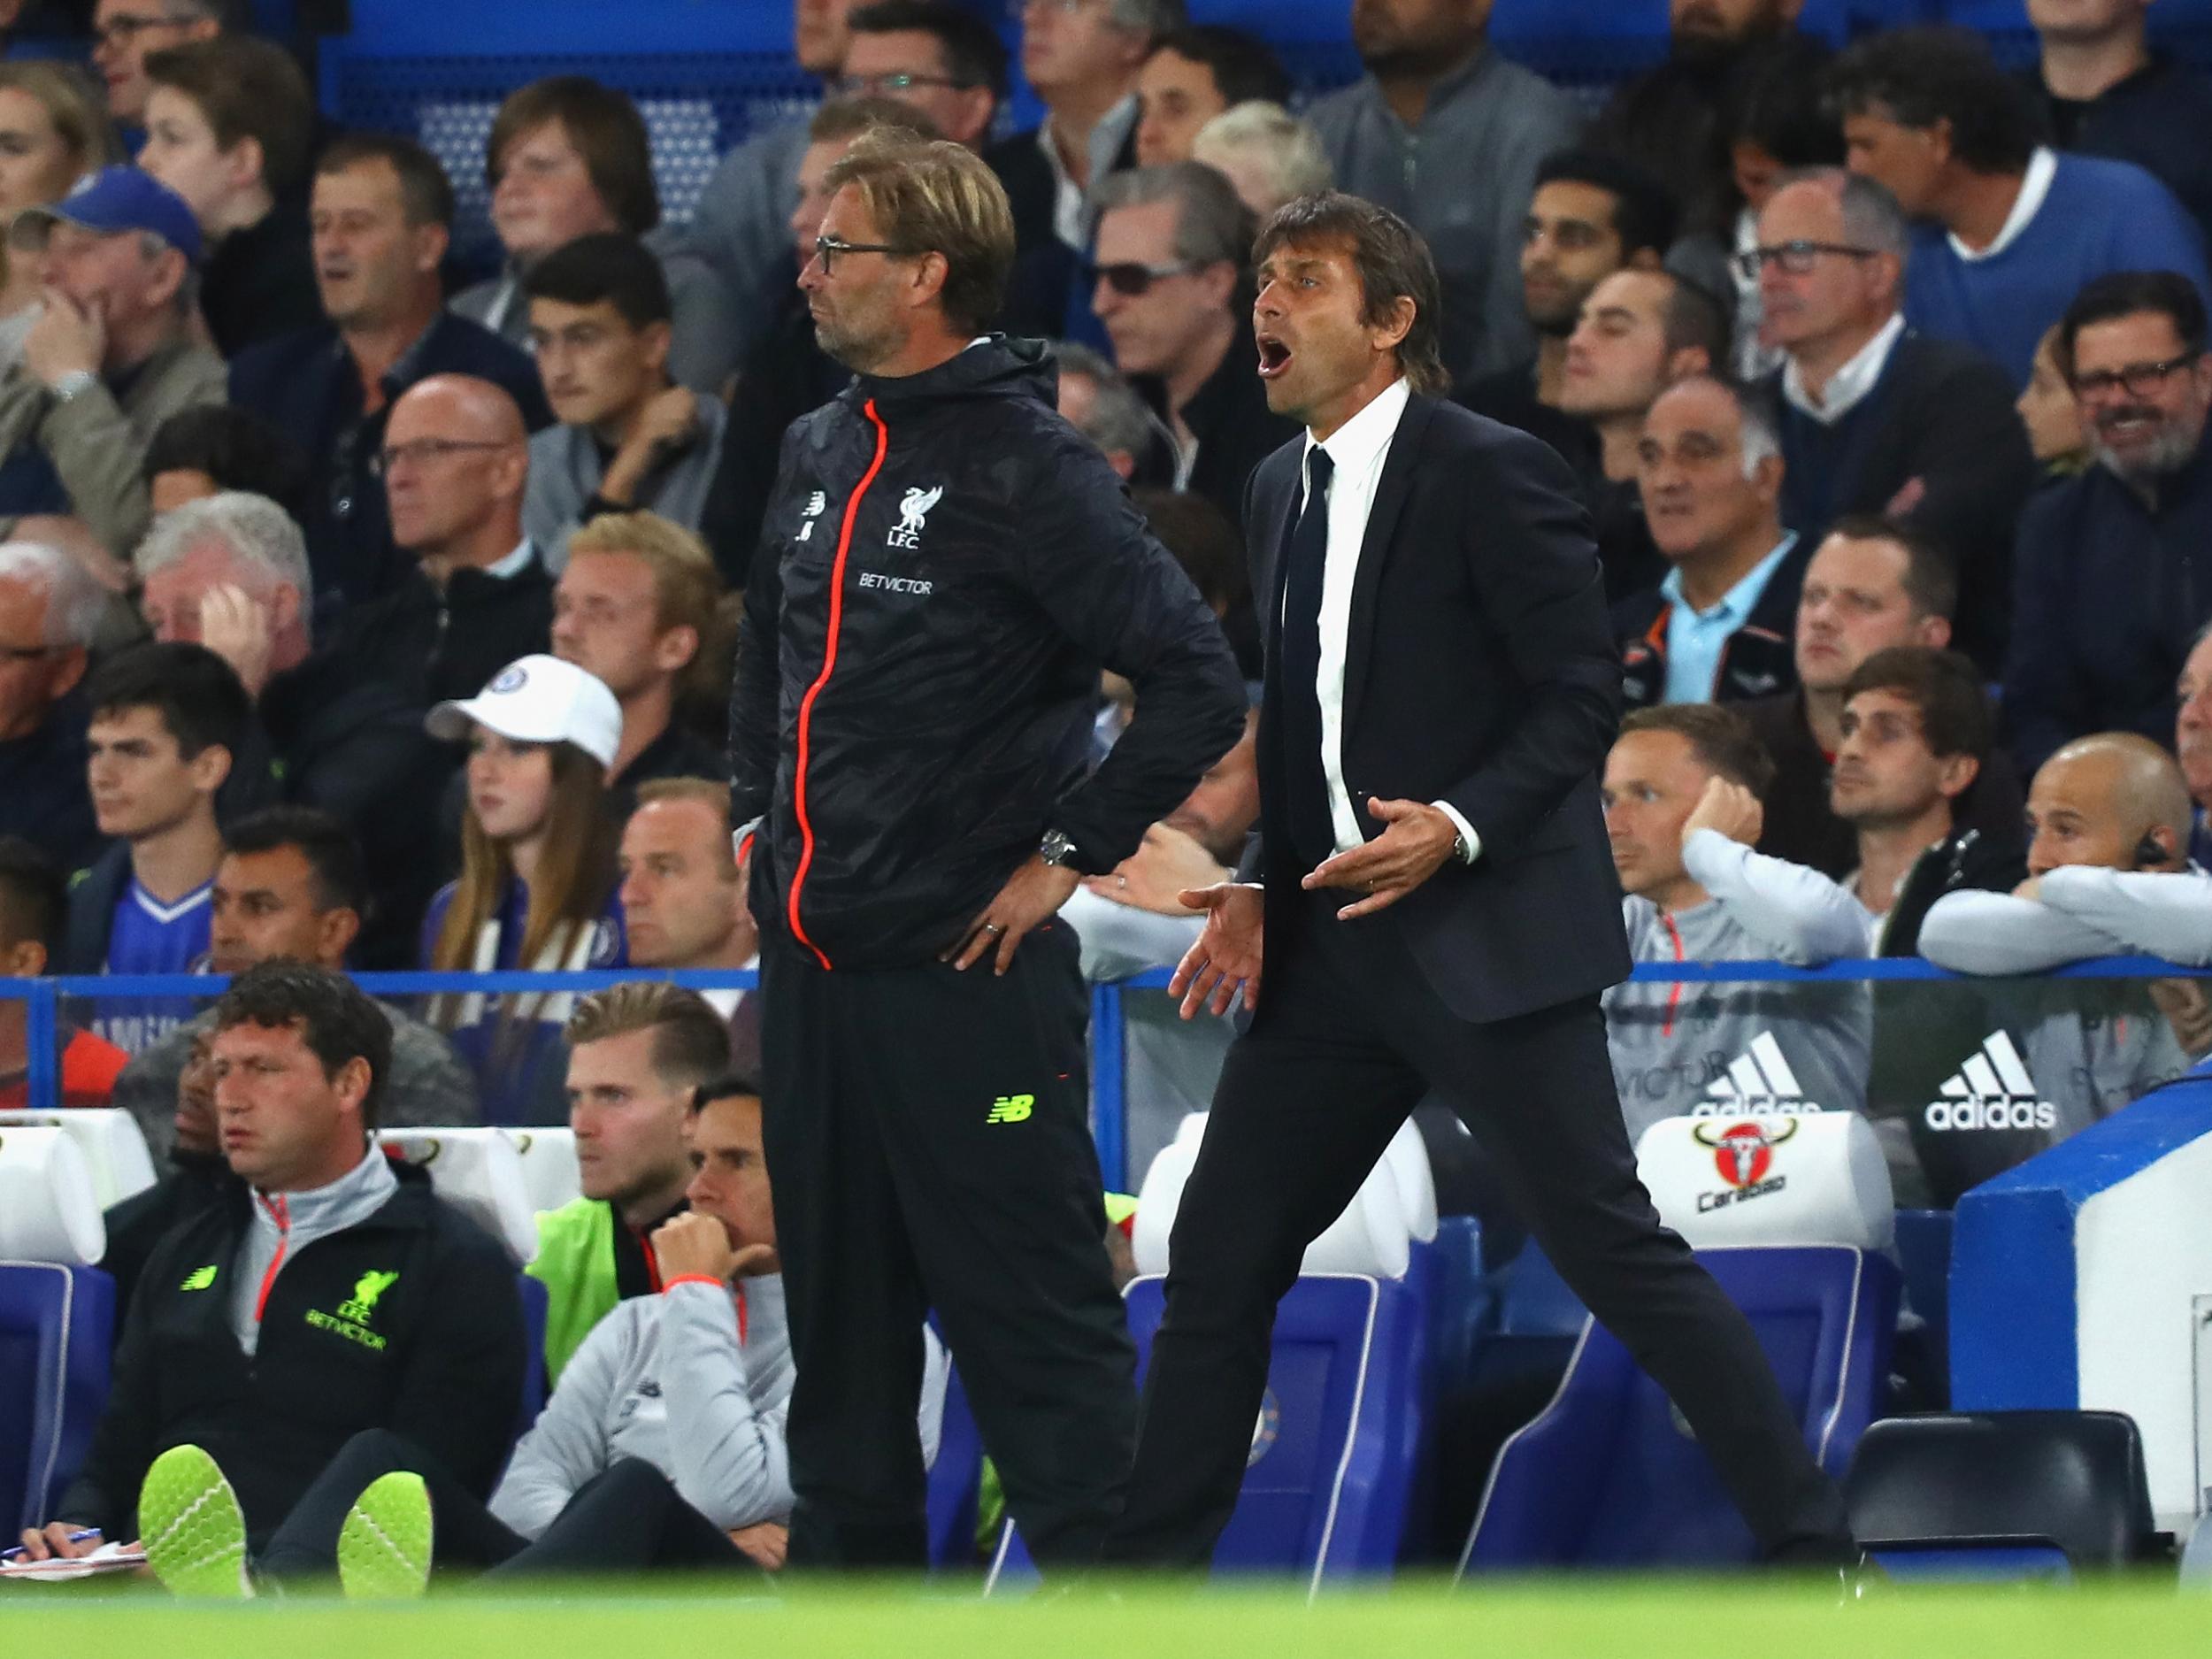 Klopp and Conte will come head to head again on Sunday